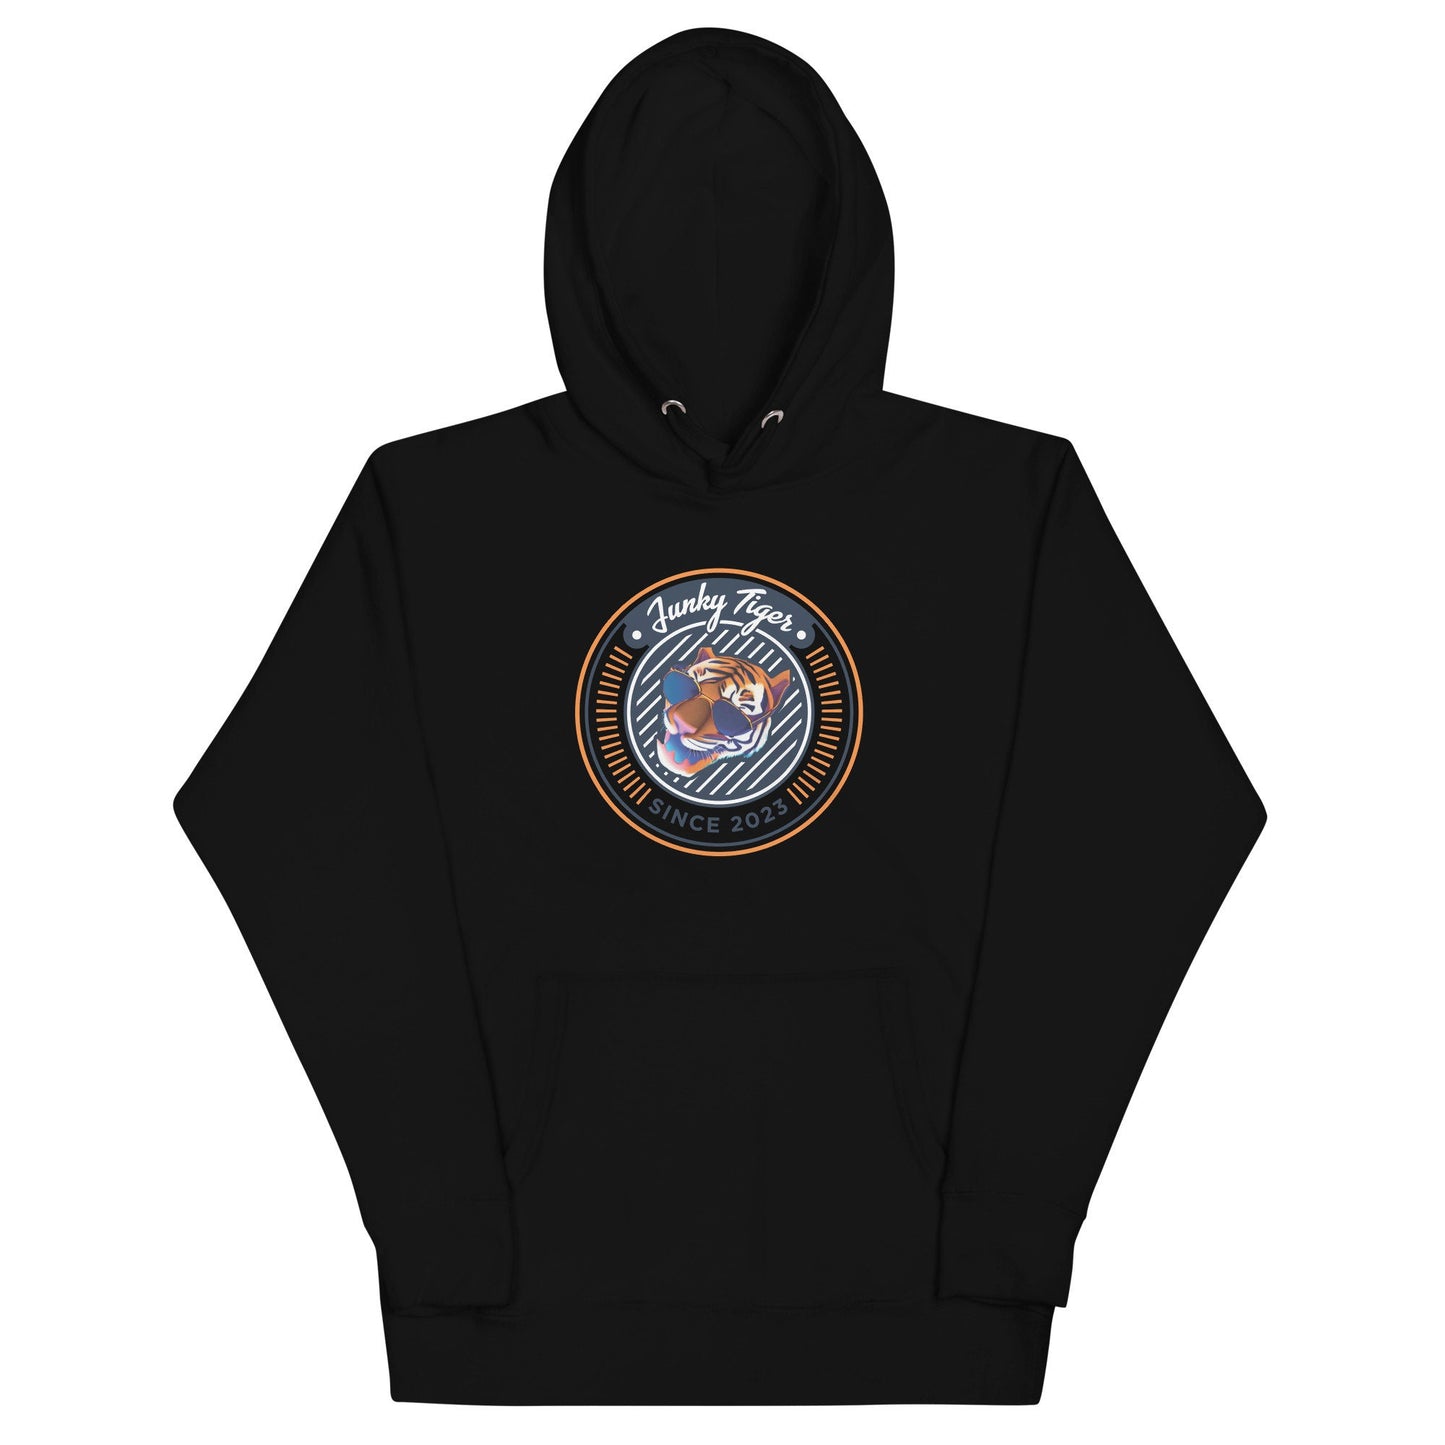 Funky Tiger® Men's Classic Logo Hoodie, Cool Sweater for Every Occasion - Black Hoodie from Small to 3XL Sizes, Small to Big and Tall,Fall